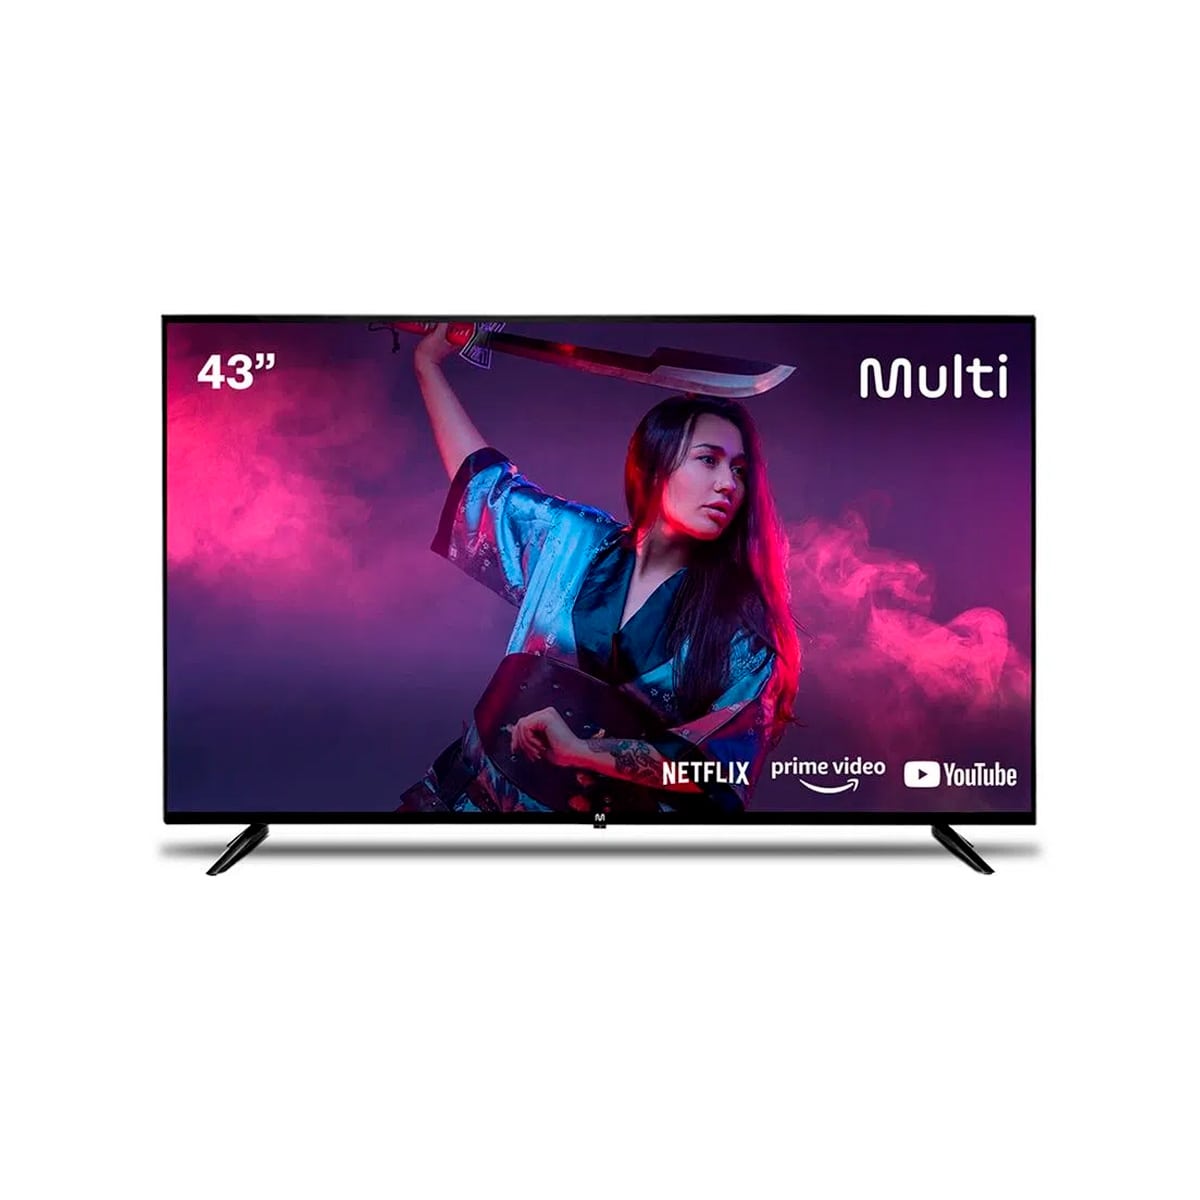 Smart Tv 43 Multilaser DLED Full HD Android 3 HDMI 2 USB Wi-Fi - TL046